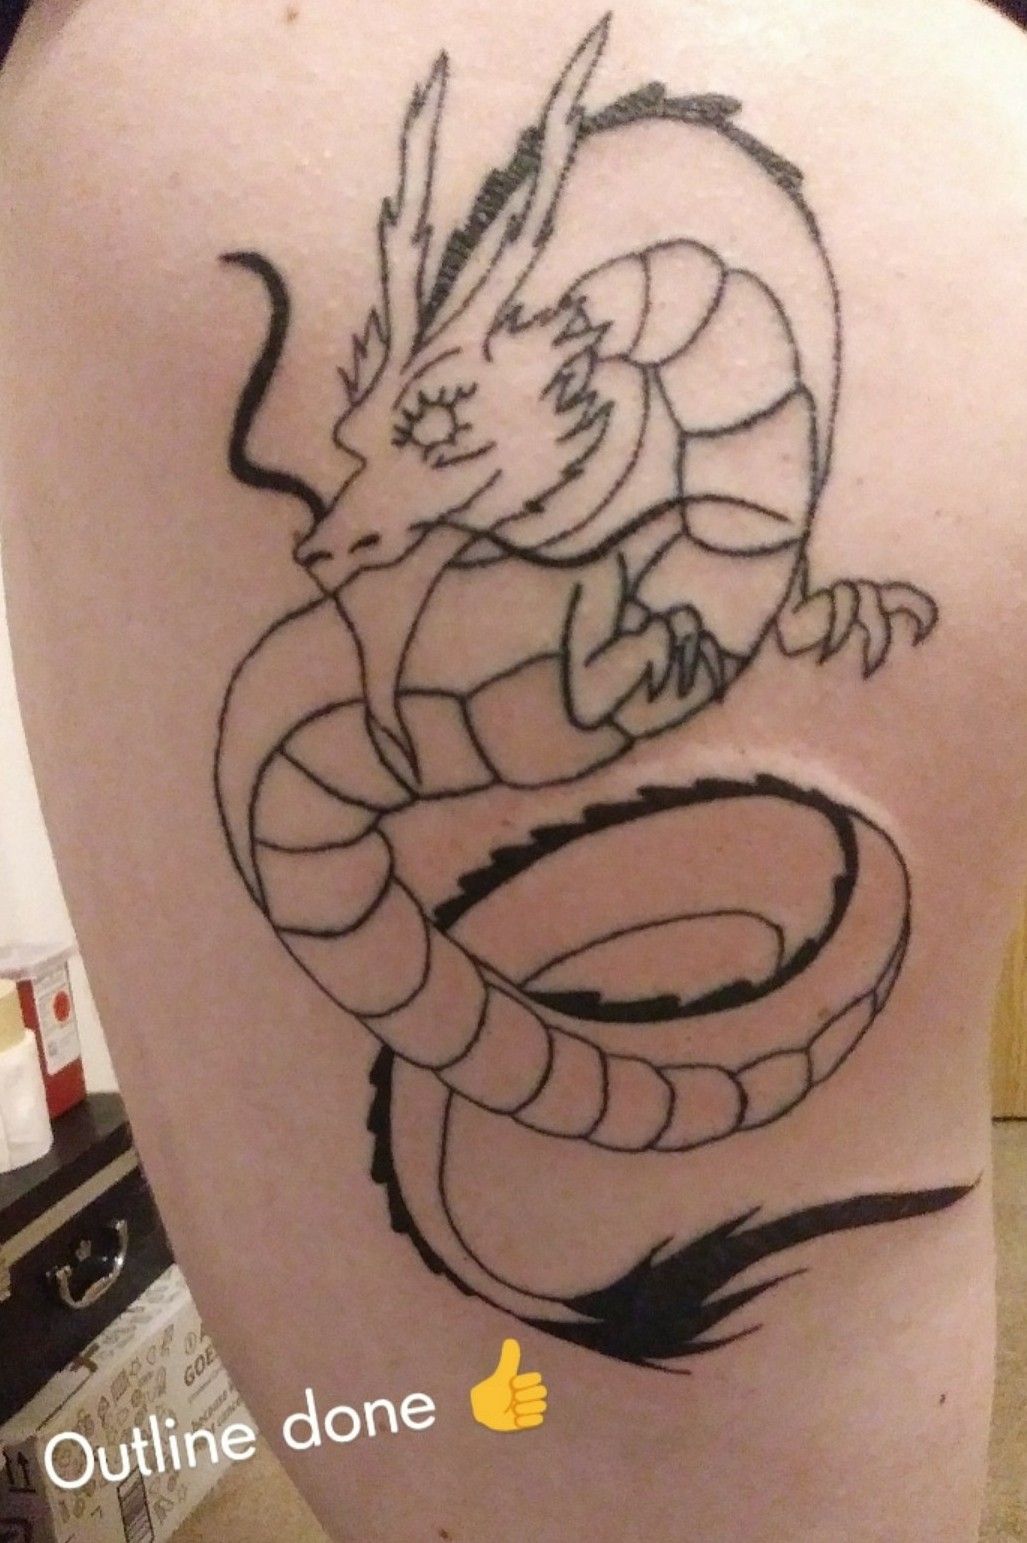 lined dragon tattoo 2 by noot on DeviantArt